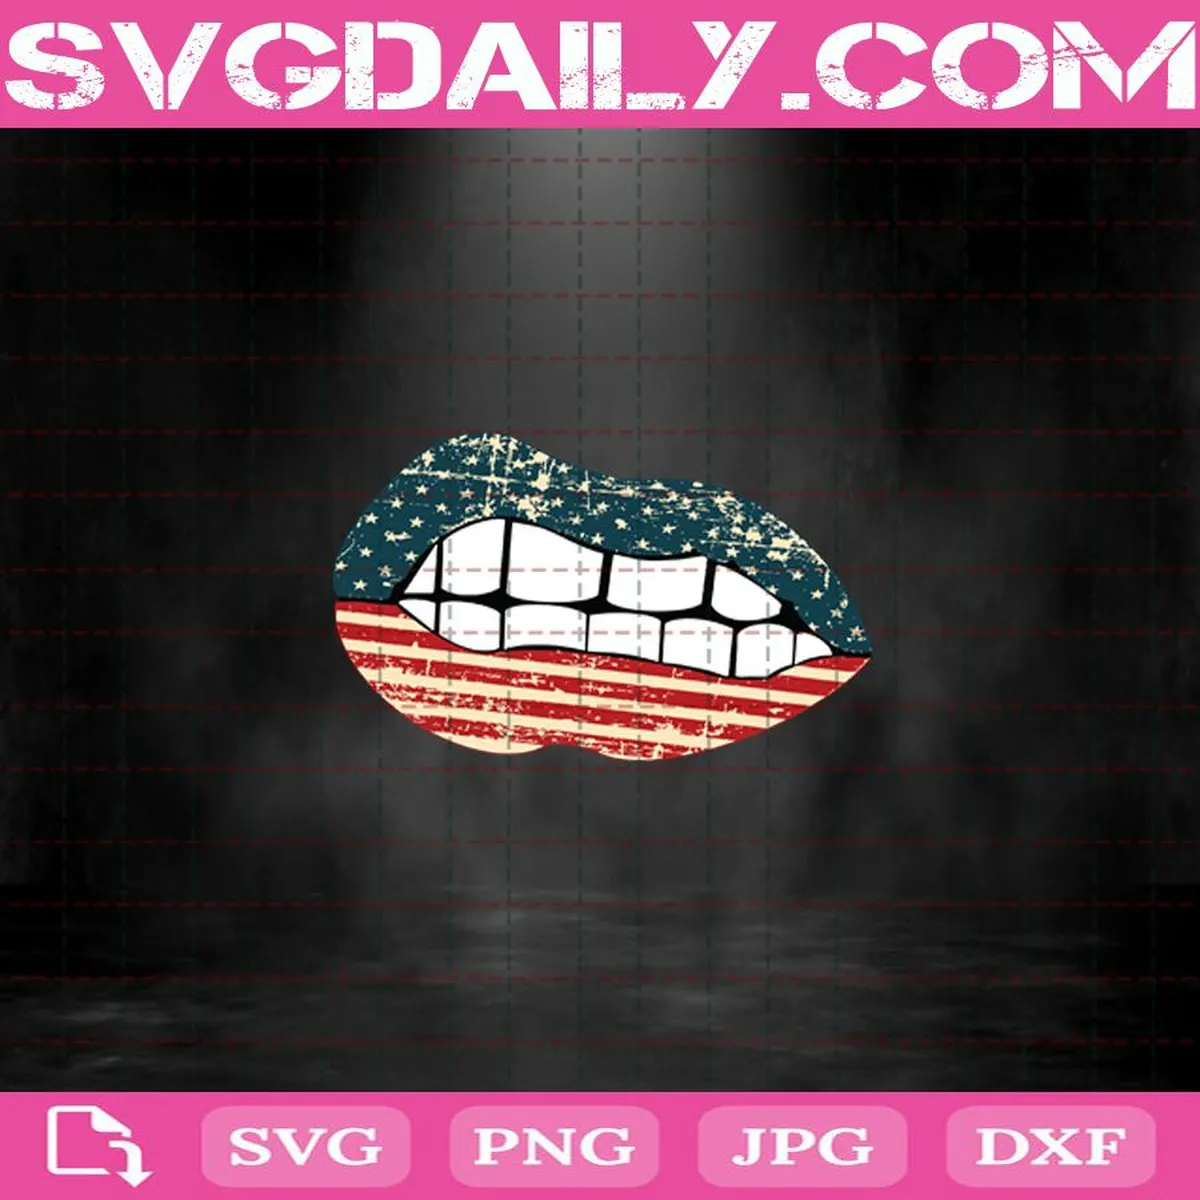 American Flag Lips For 4th of July Svg, American Flag Svg, Lips Svg, 4th of July Svg, Independent Day Svg